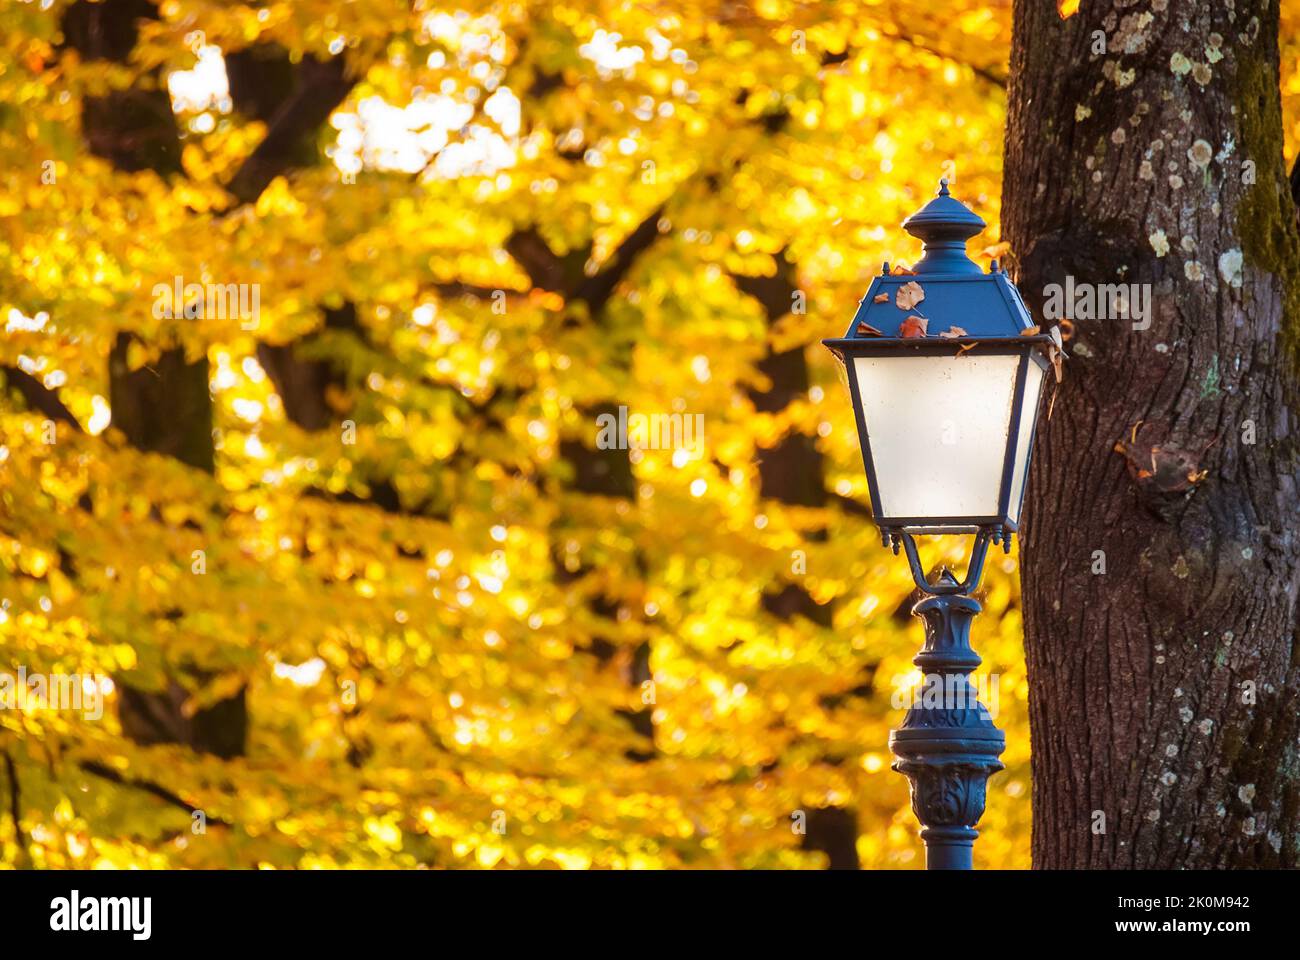 Autumn and foliage in the park. Vintage street lamp among autumnal leaves Stock Photo